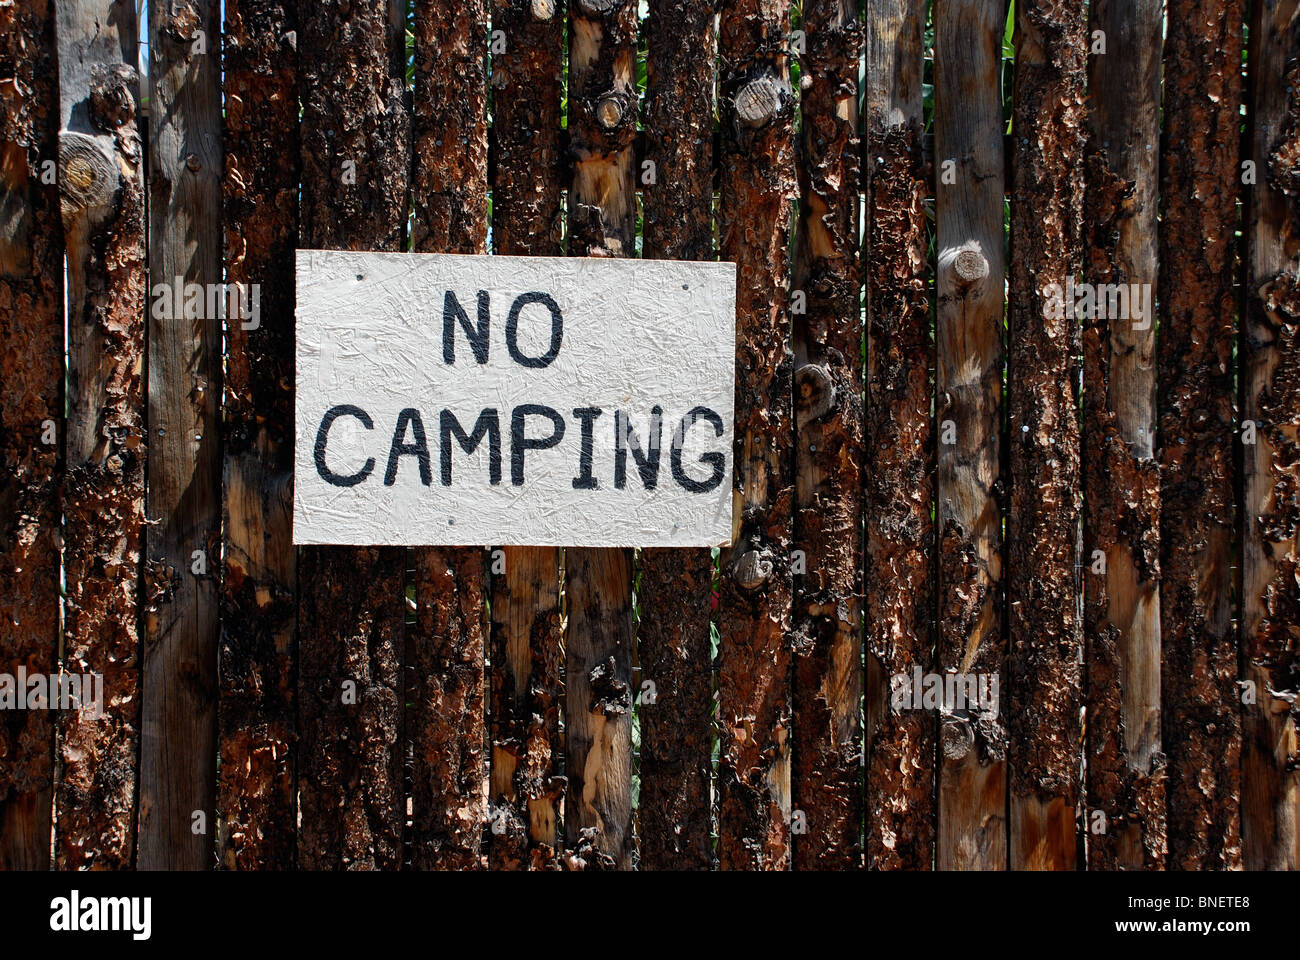 No Camping sign on wooden fence Stock Photo